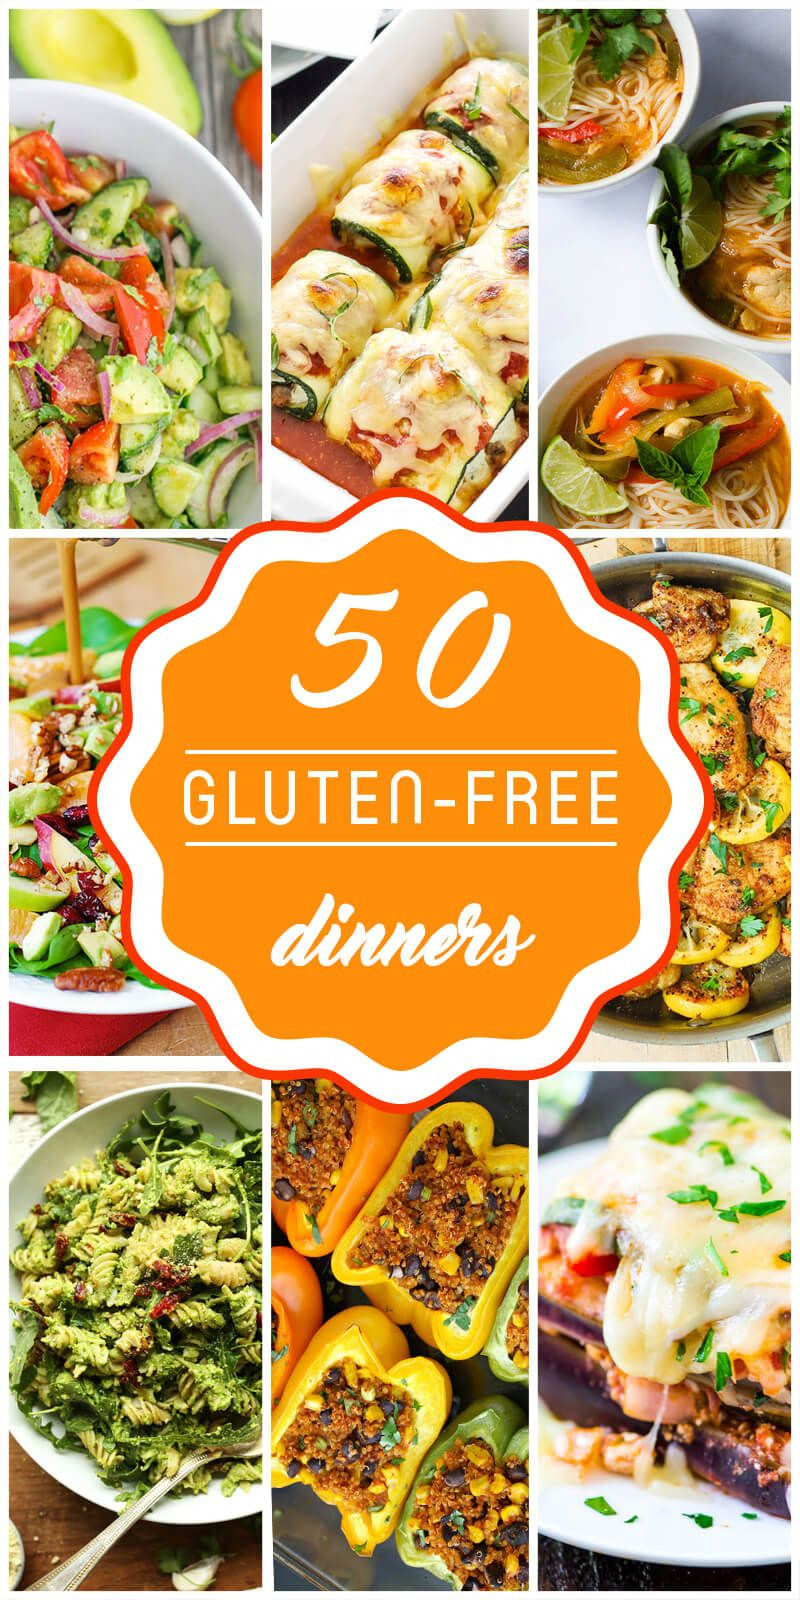 Healthy Gluten Free Dinner Recipes
 50 Gluten Free Dinner Recipes to Make You For You re